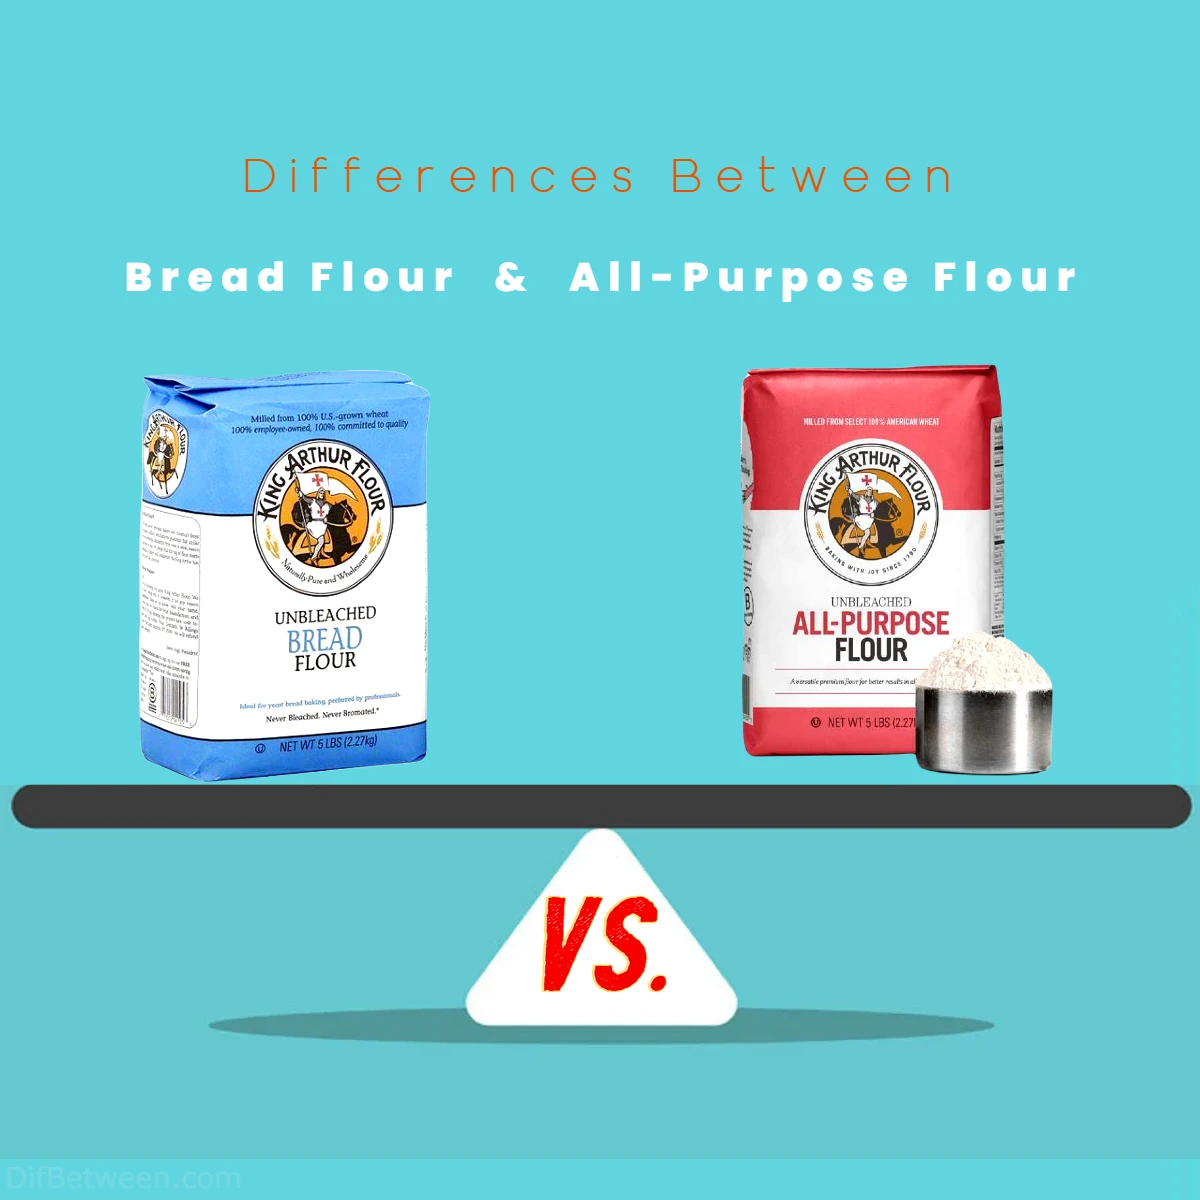 Differences Between Bread Flour vs All Purpose Flour